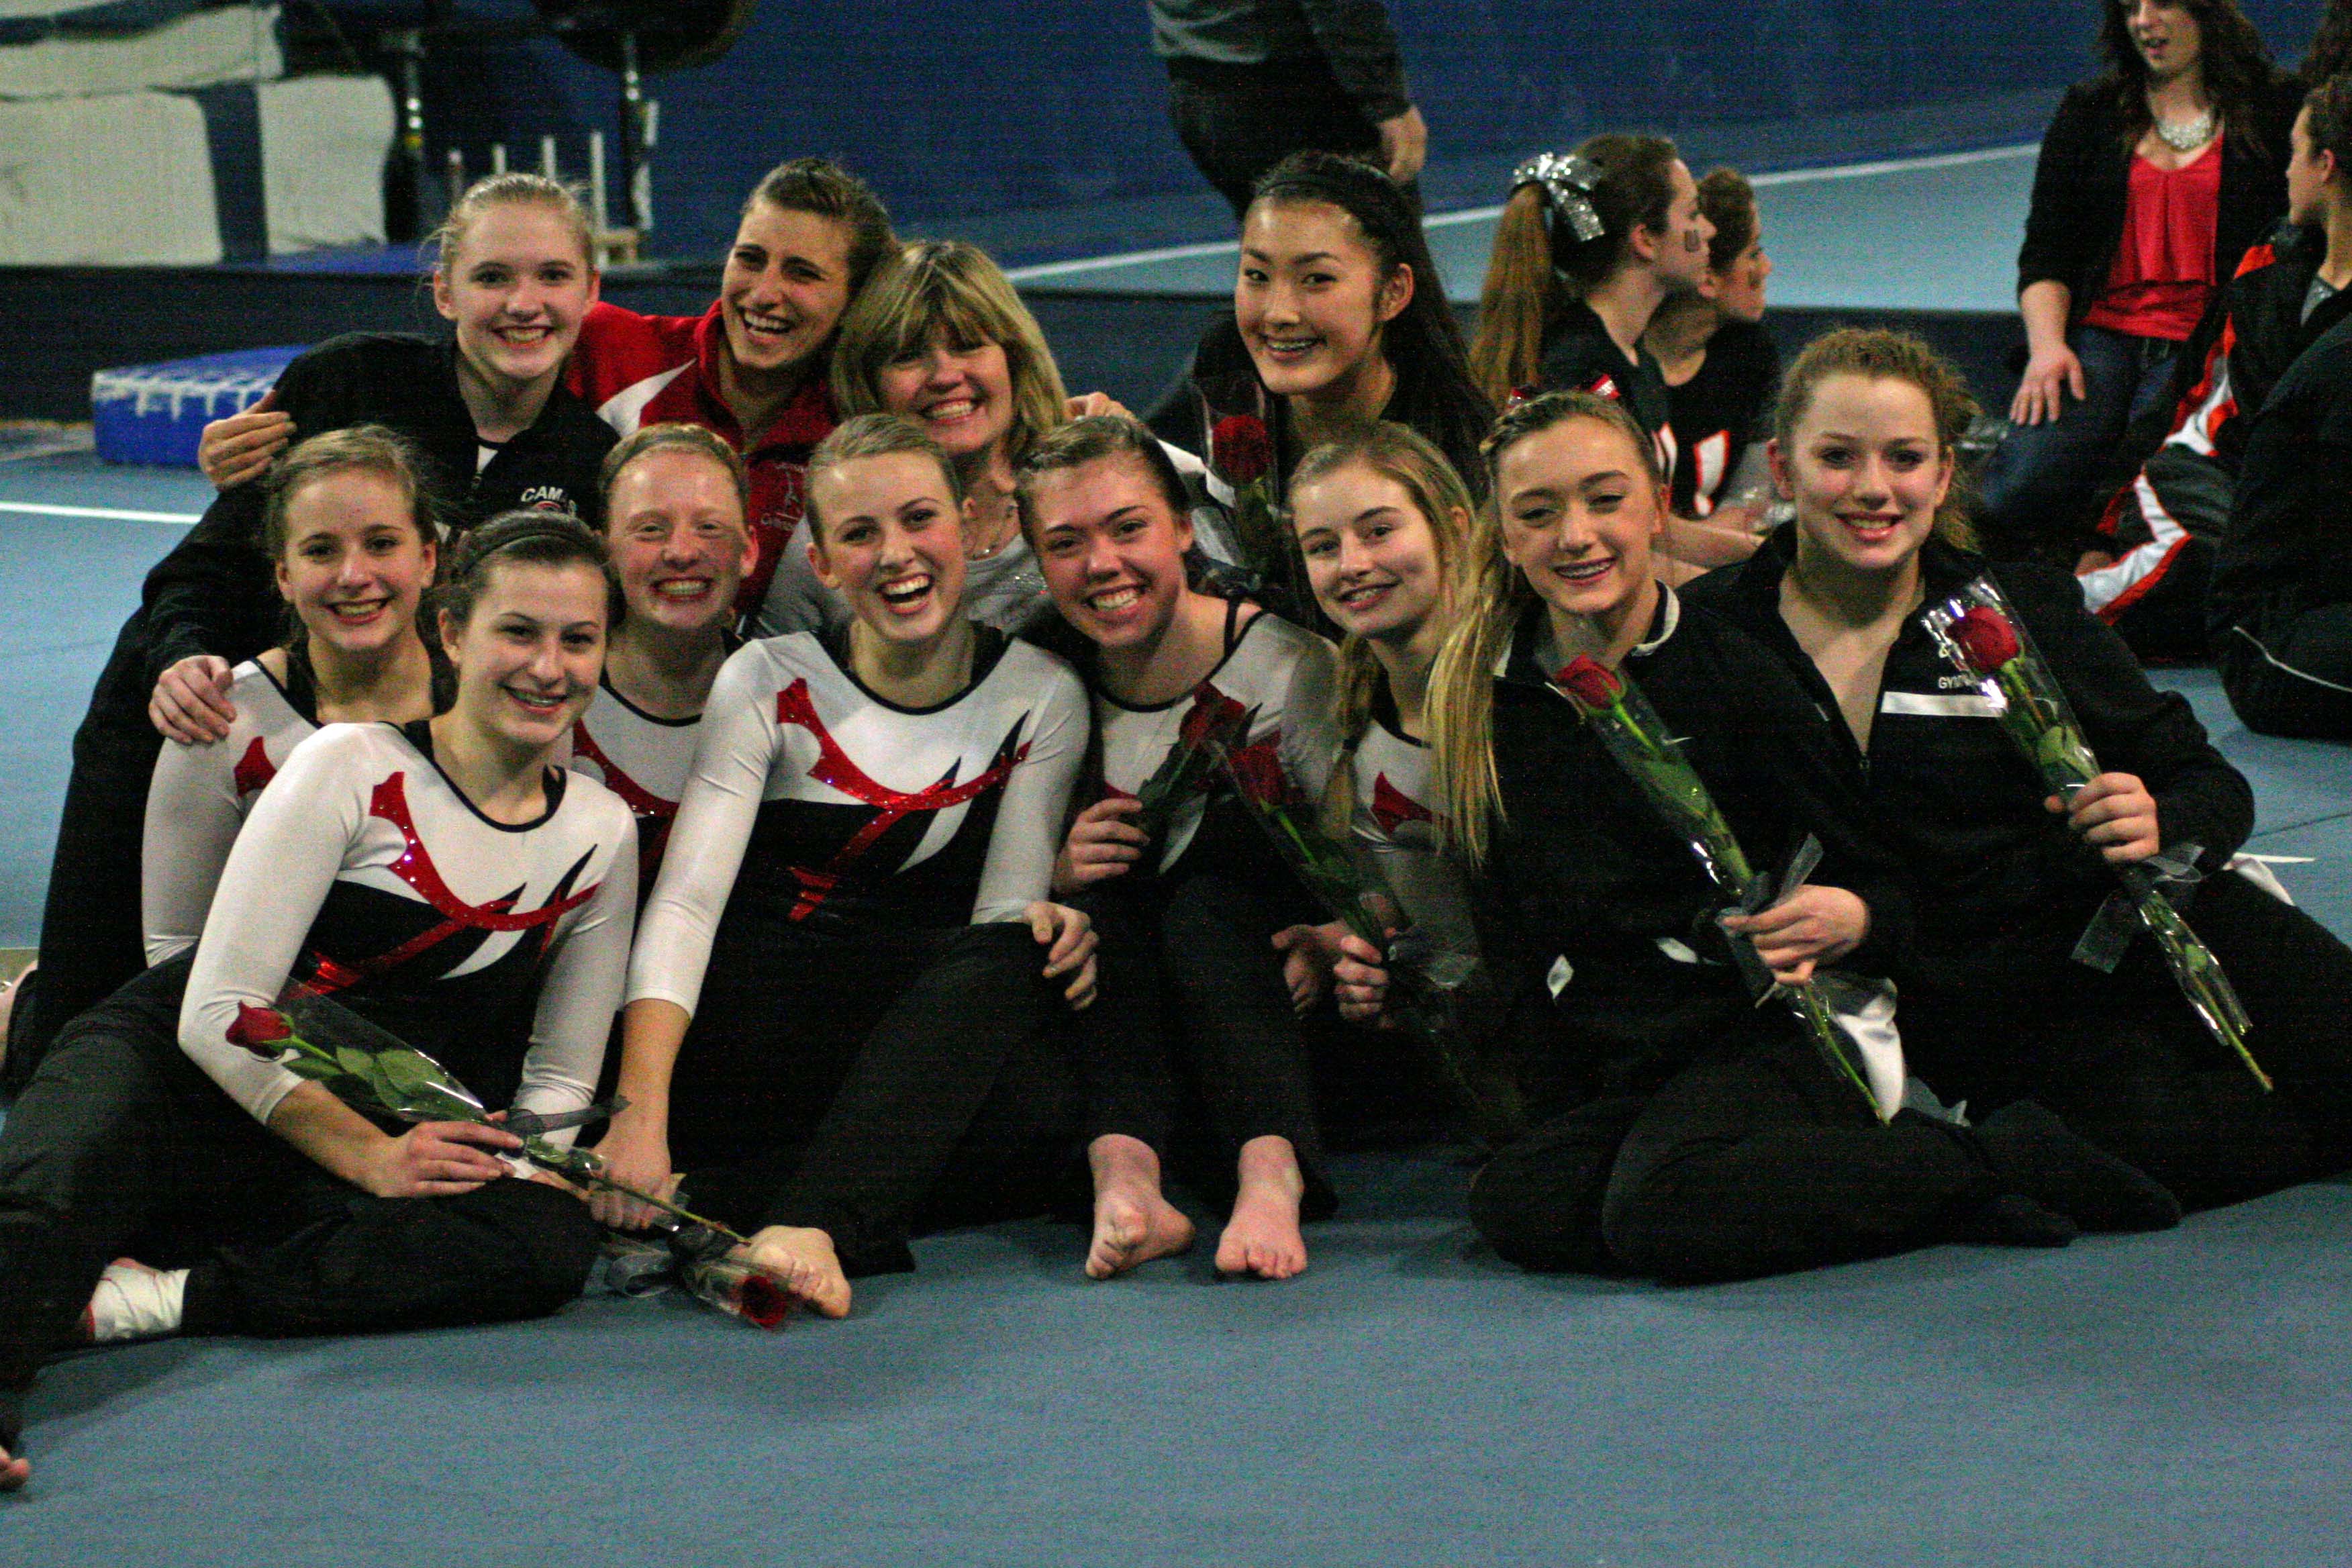 The Camas High School gymnasts and coaches are all smiles after becoming district champions, at Northpointe in Vancouver.